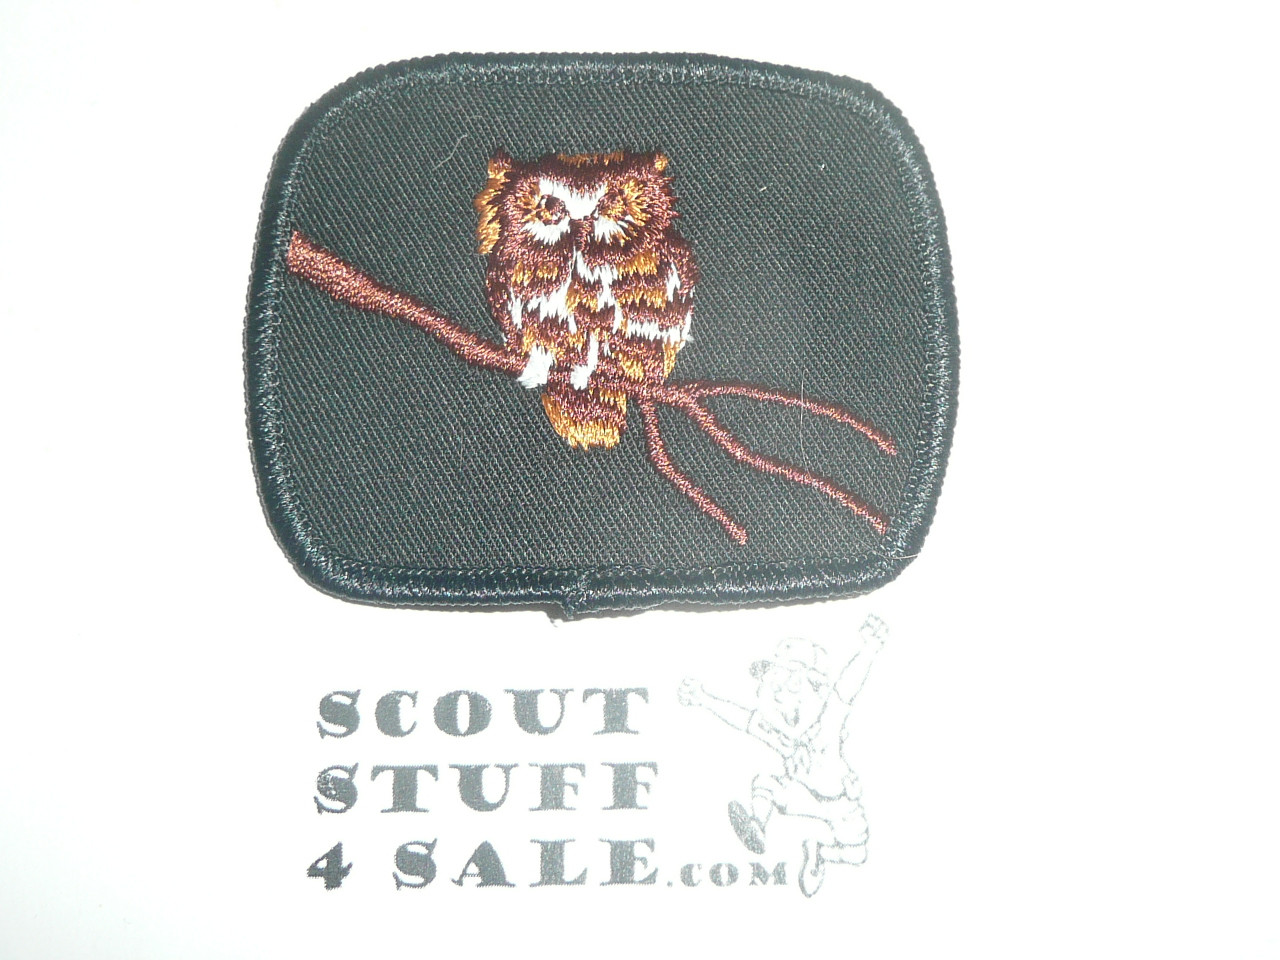 Owl Patrol Patch, Canadian, also used by Wood Badge Patrols